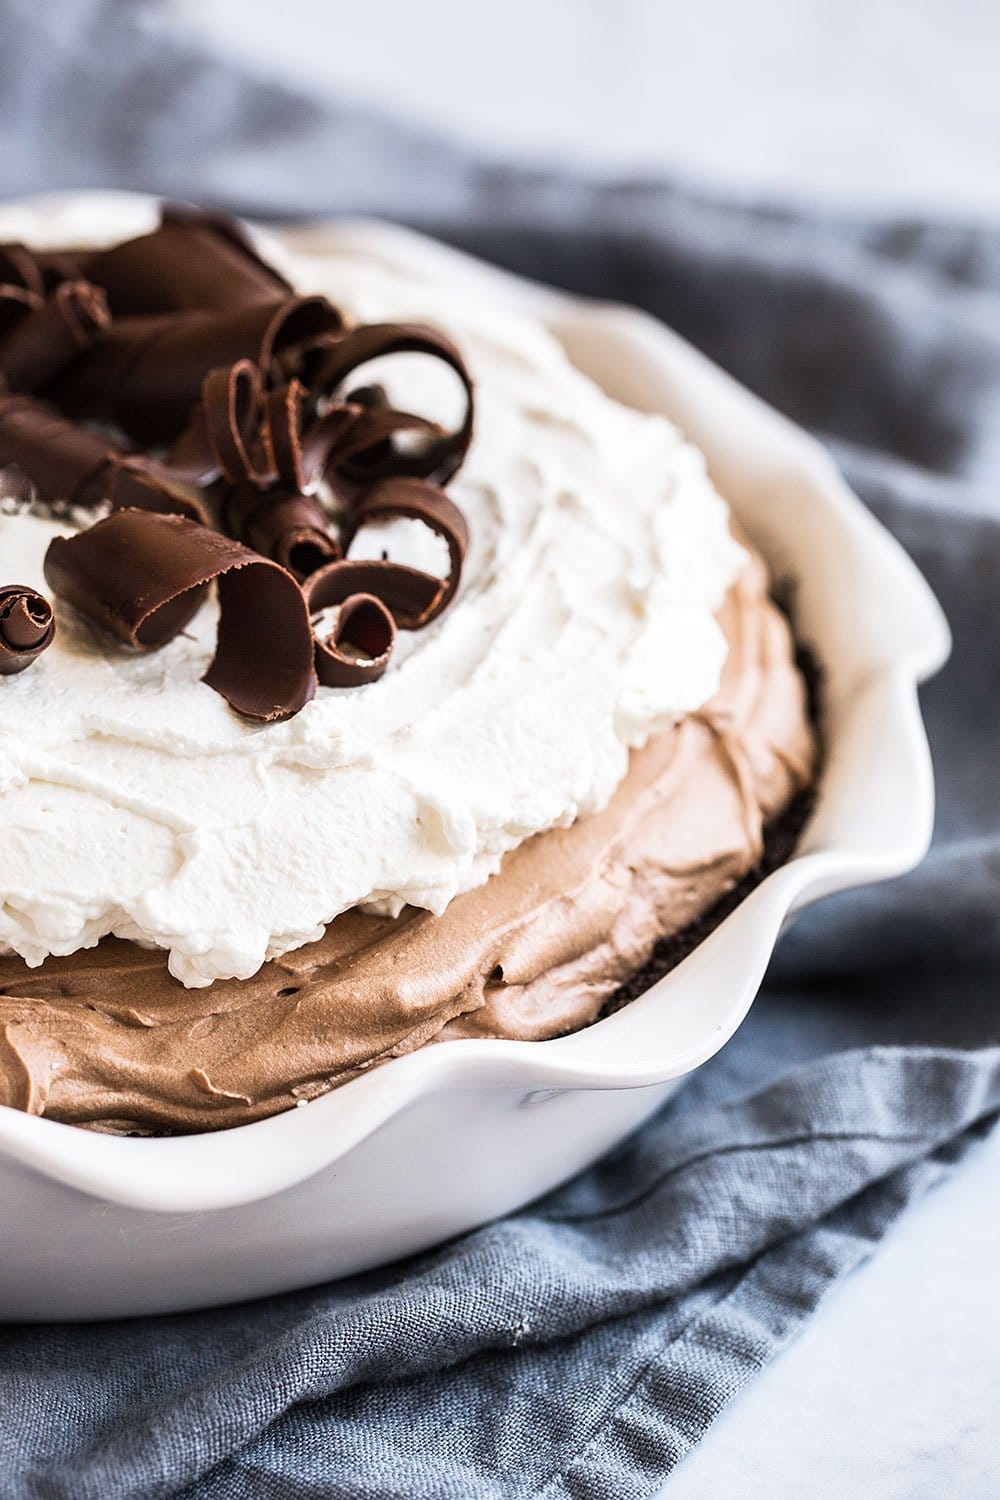 French Silk Pie made from scratch is SO much better than the premade pie you buy from the freezer section of the grocery store. It's a family favorite!